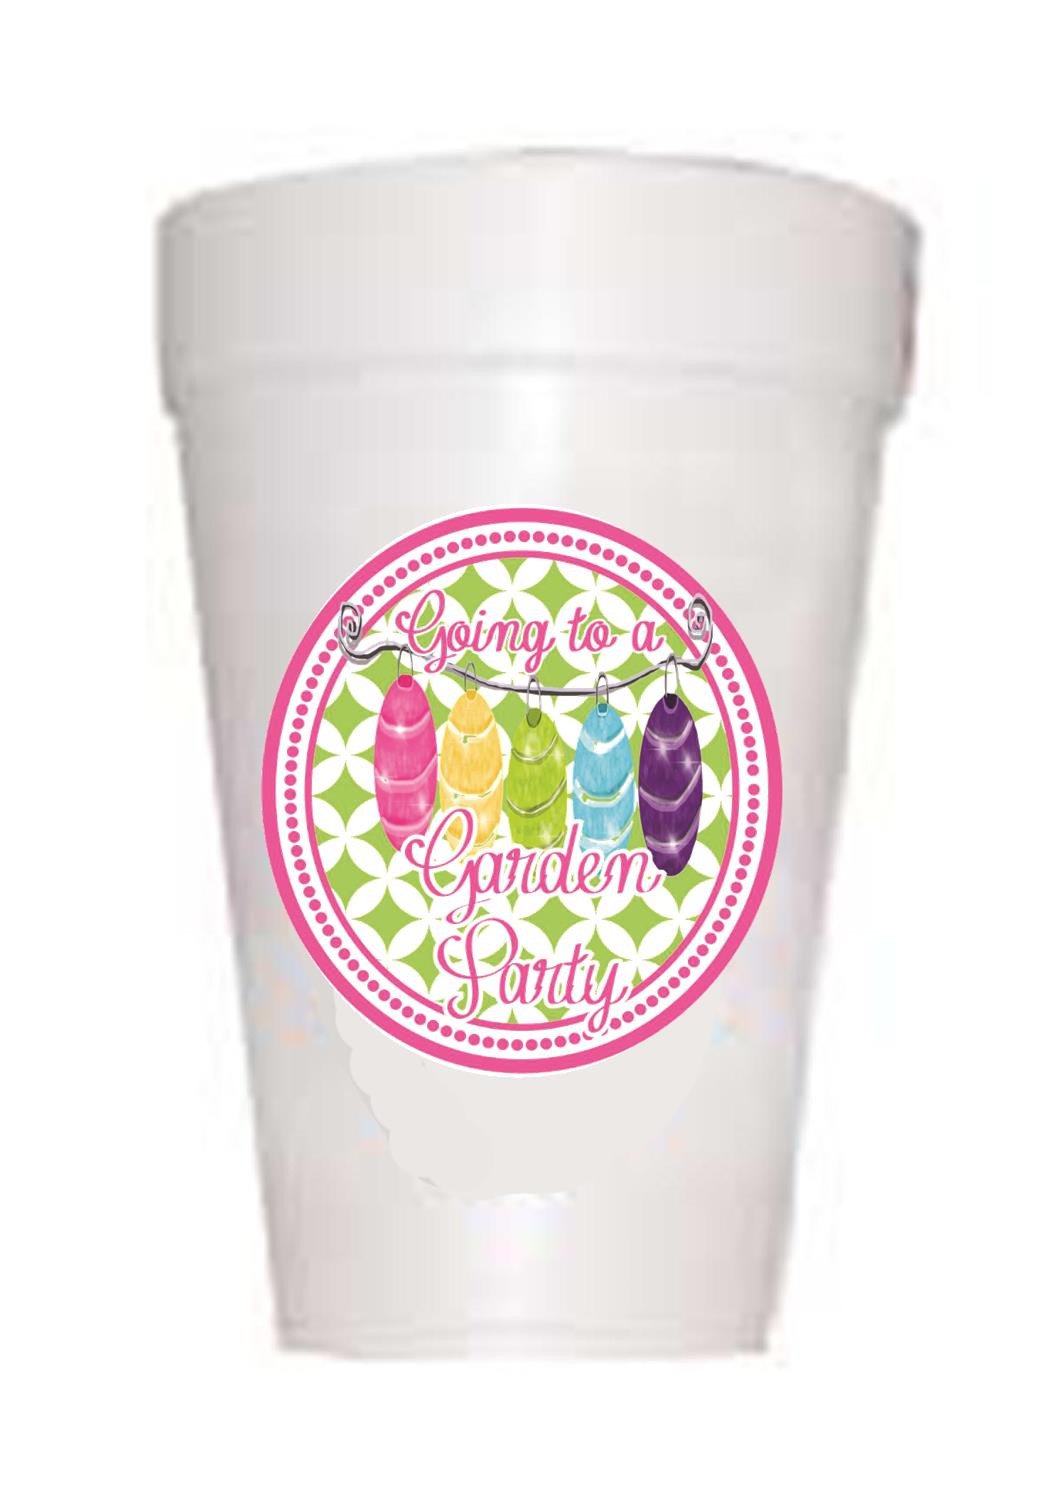 Styrofoam cup with colorful garden lanterns